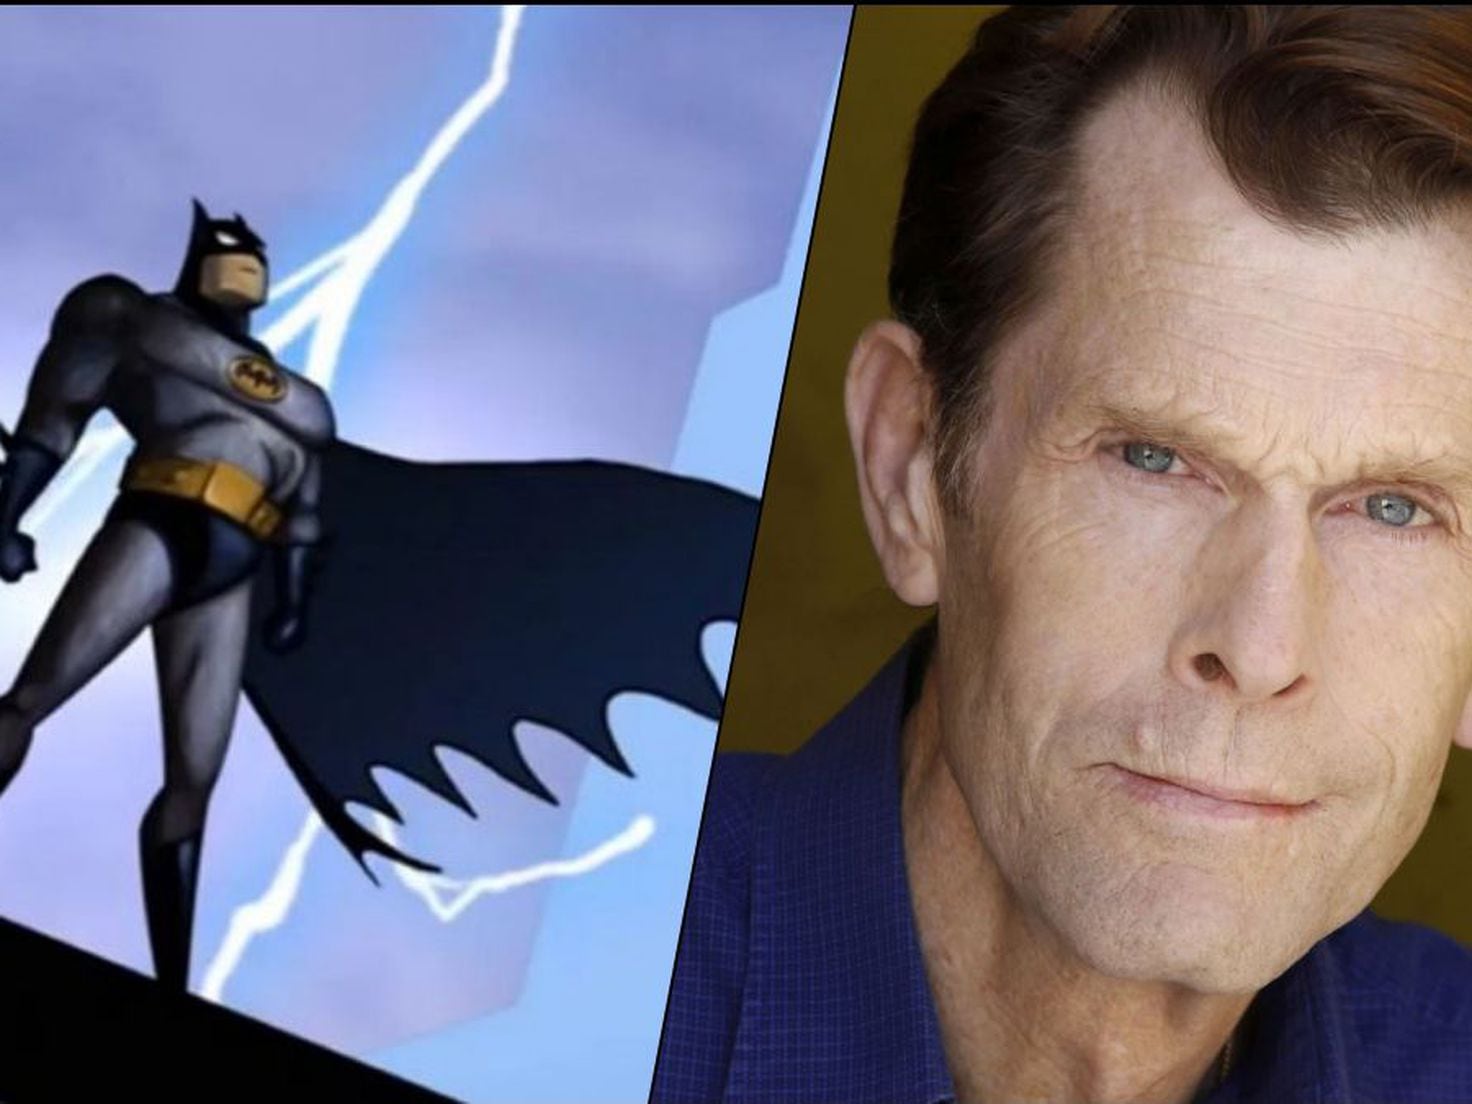 Finding Batman By Kevin Conroy Is A Story For The Ages - Dark Knight News